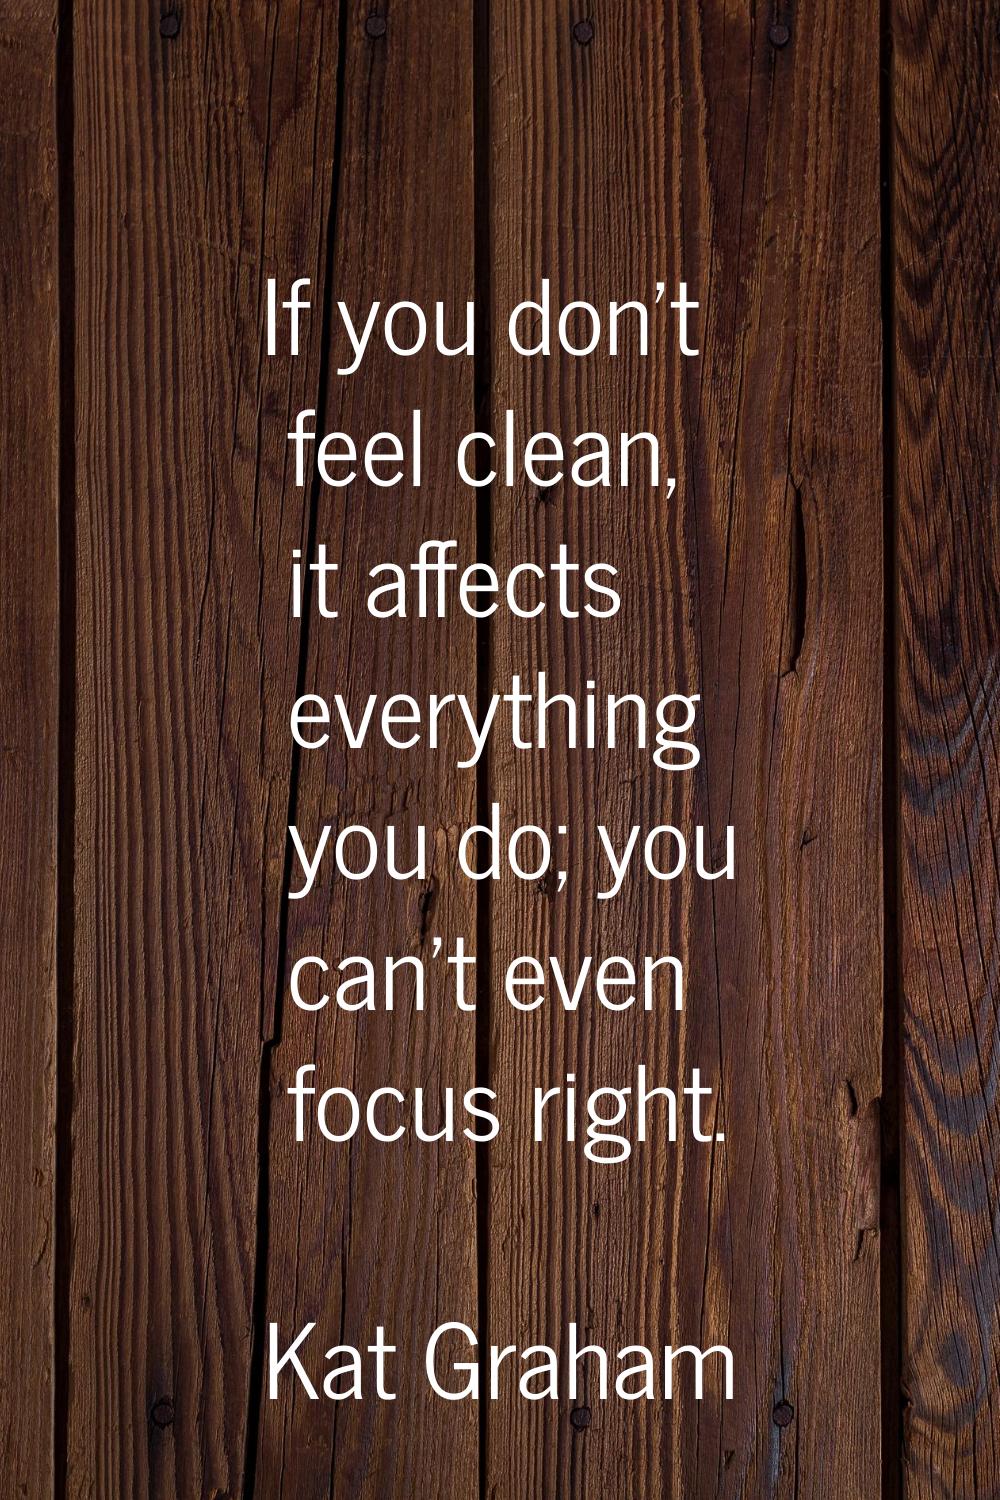 If you don't feel clean, it affects everything you do; you can't even focus right.